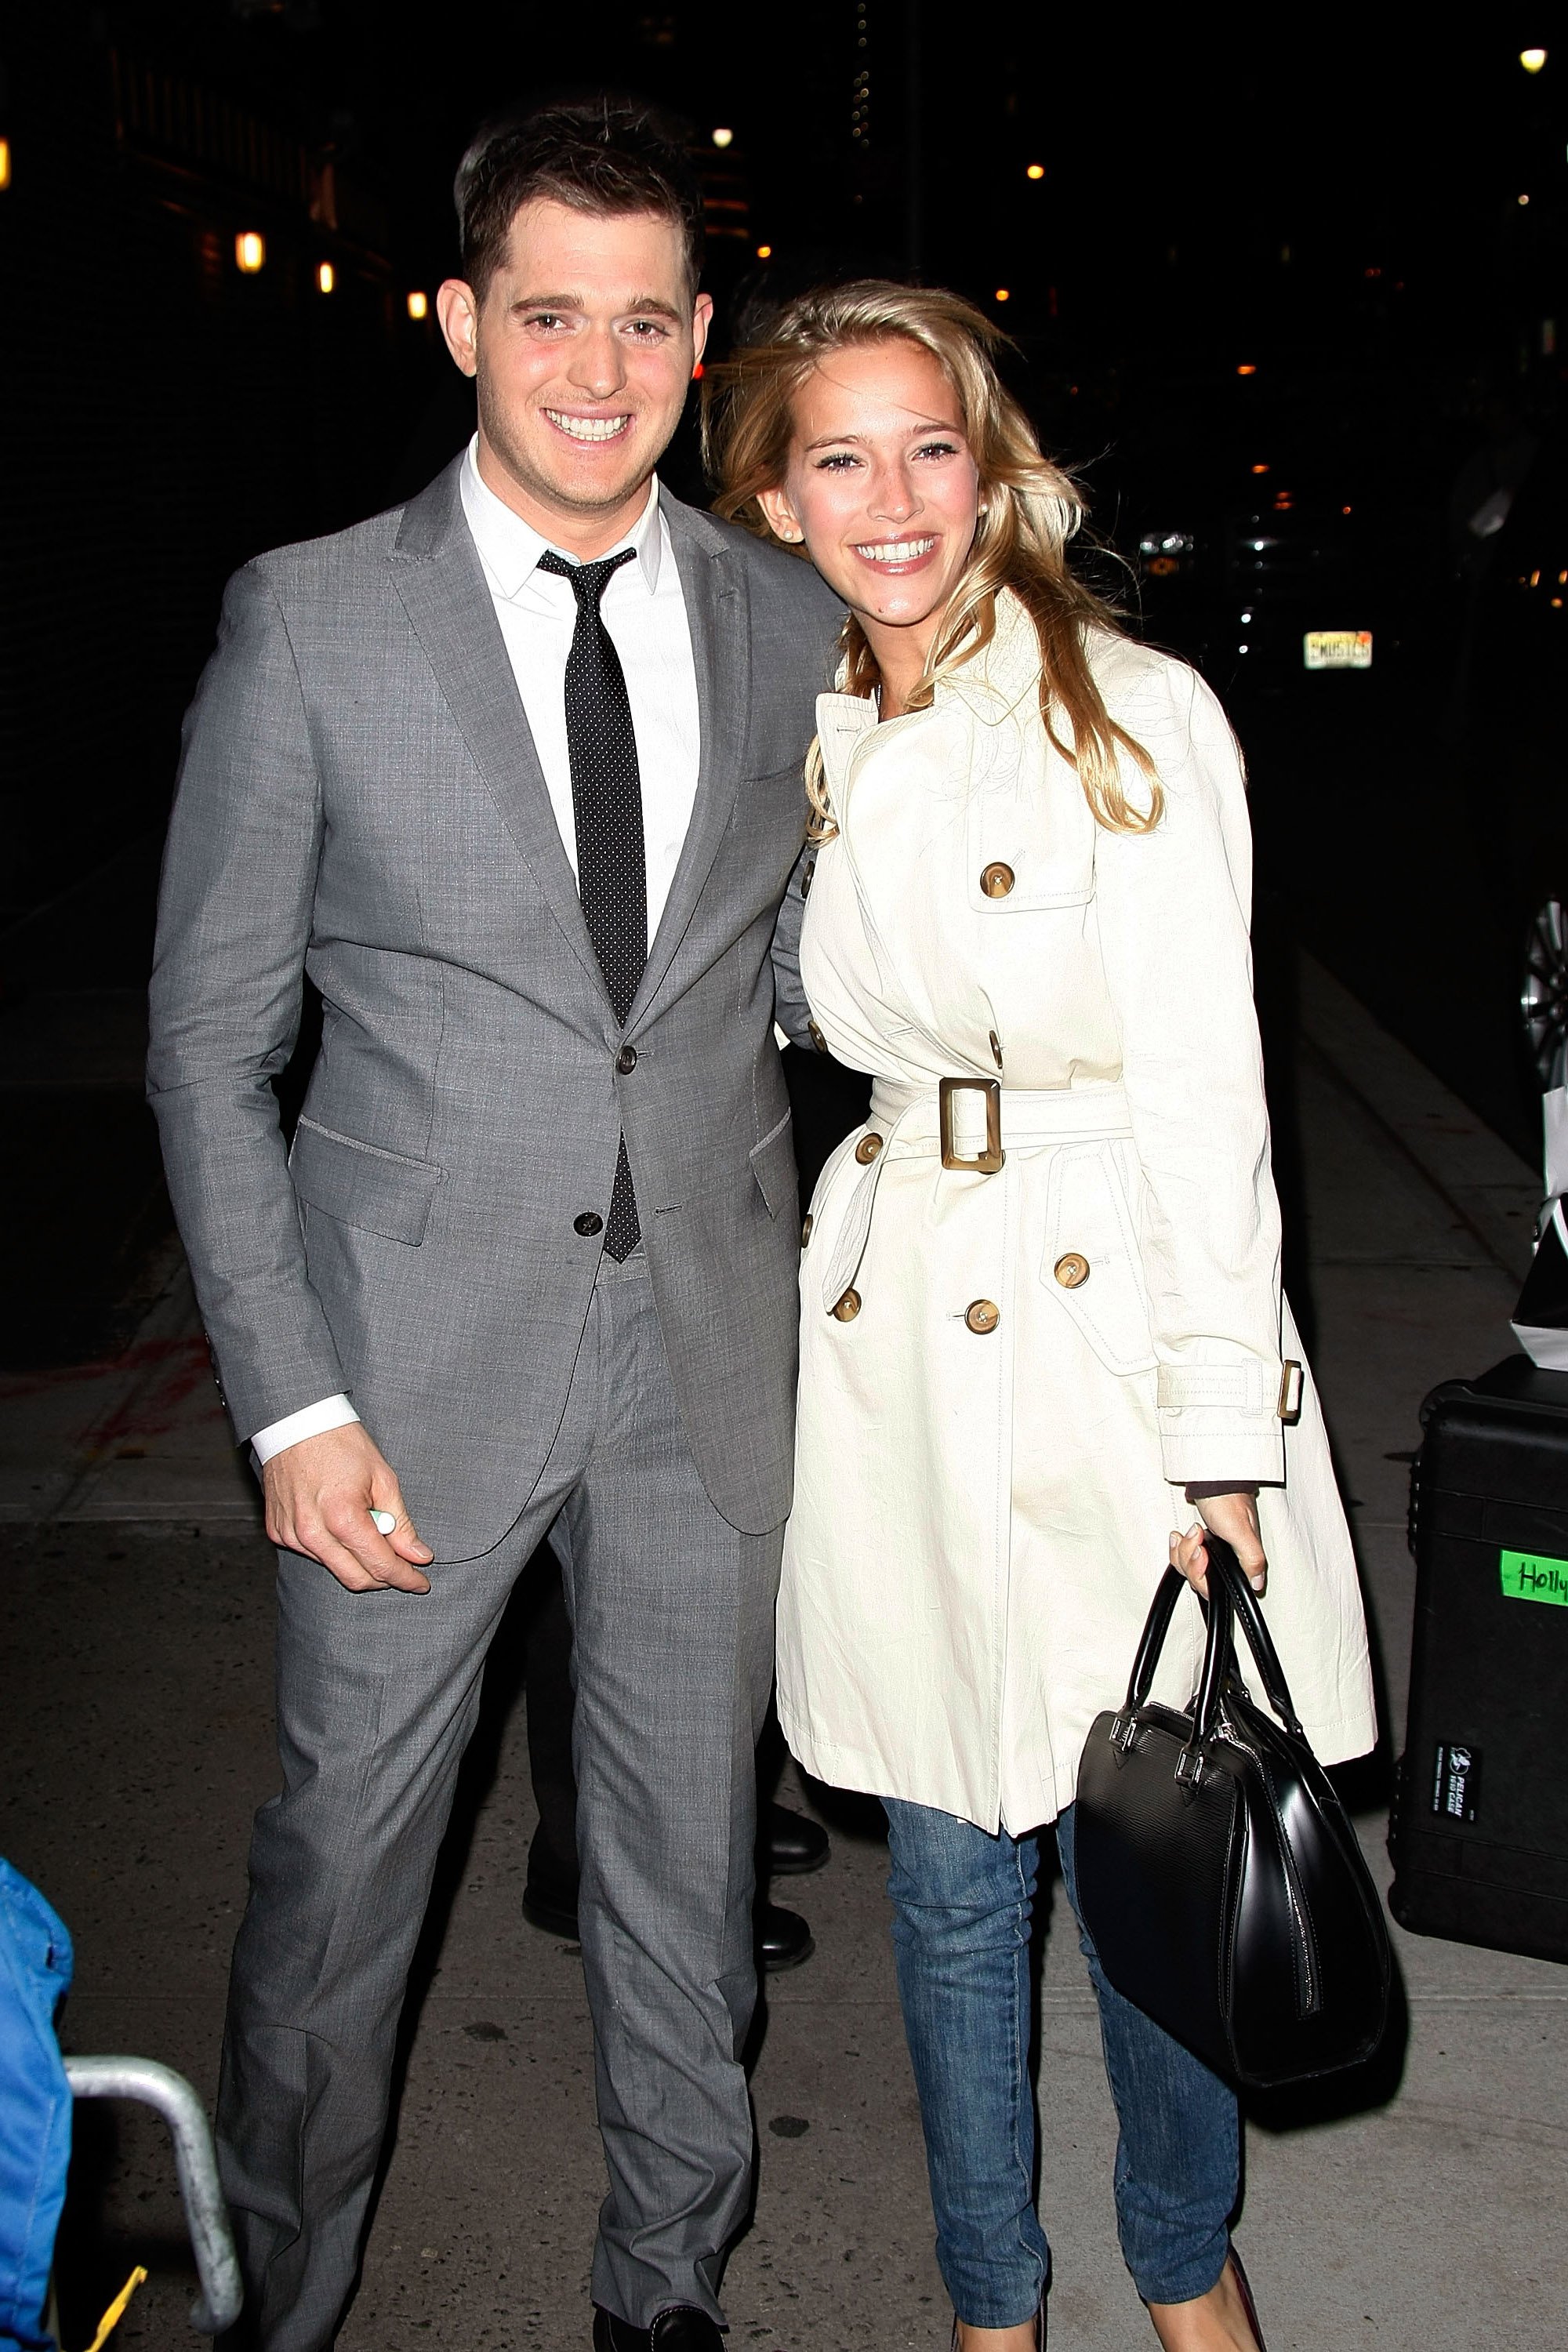 Singer Michael Buble and his girlfriend actress Luisana Lopilato visit "Late Show With David Letterman" at the Ed Sullivan Theater on November 3, 2009 in New York City. | Source: Getty Images